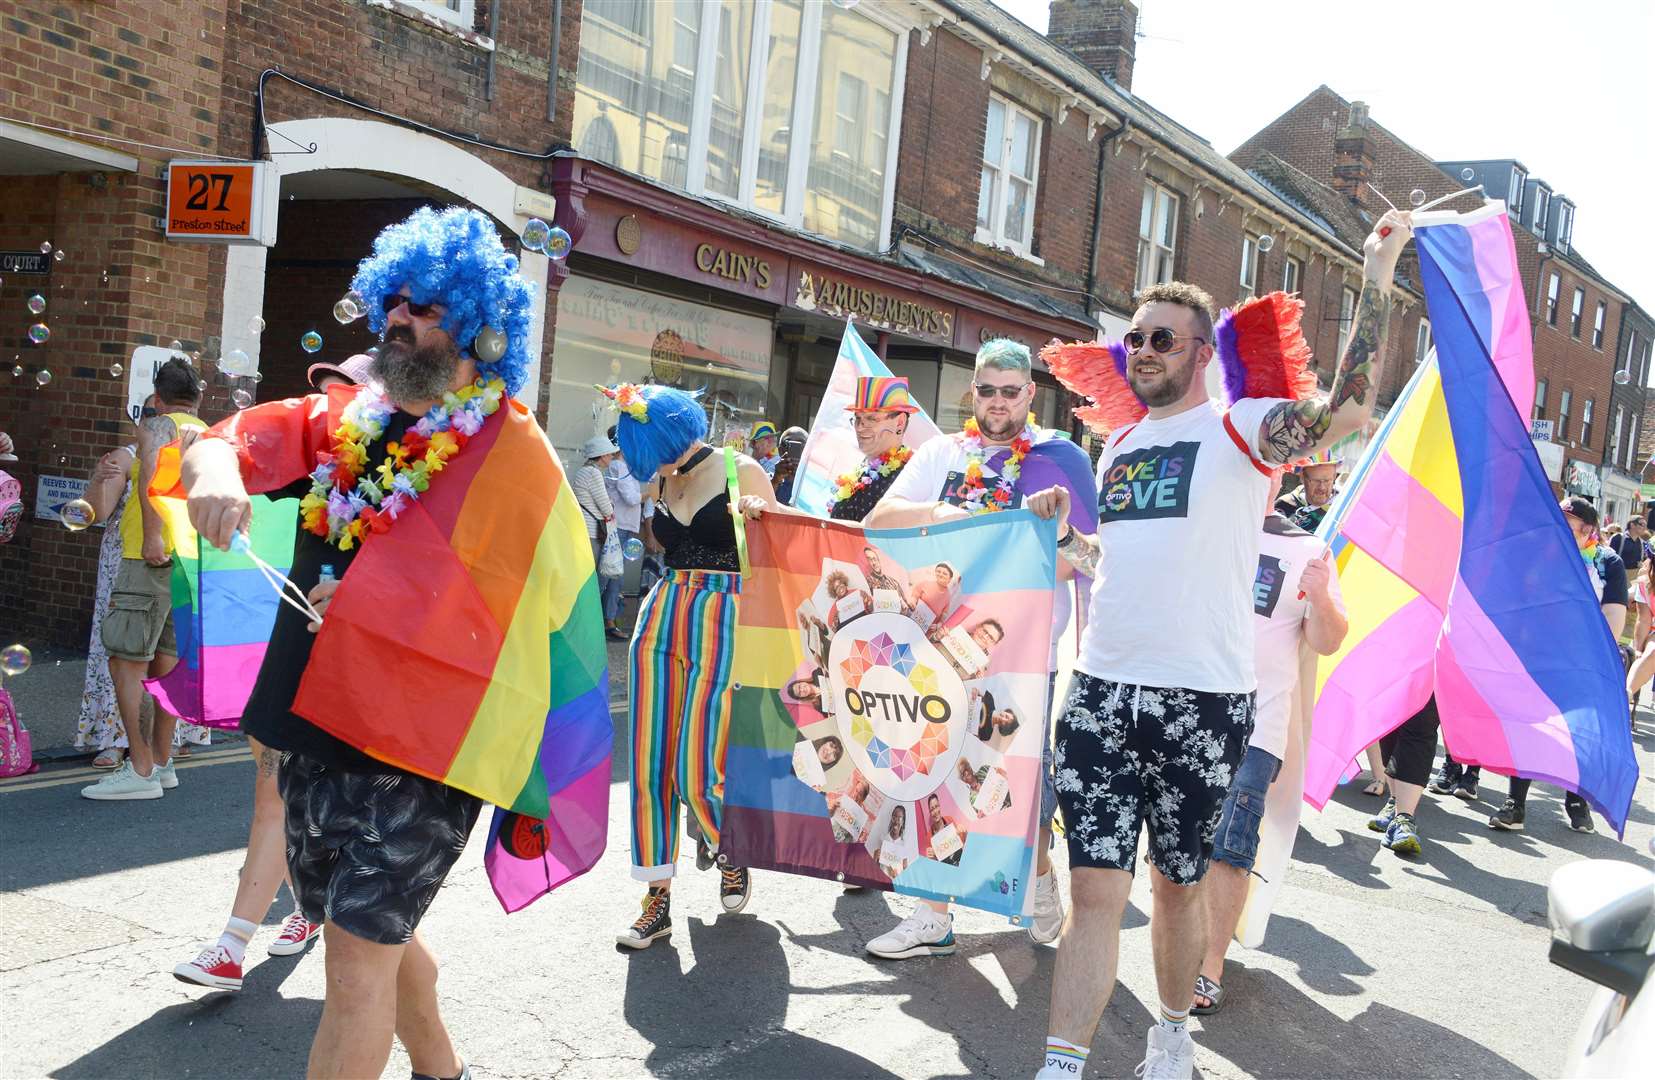 Swale Pride, which began in Faversham, will take place in Sheerness this year. Picture: Paul Amos